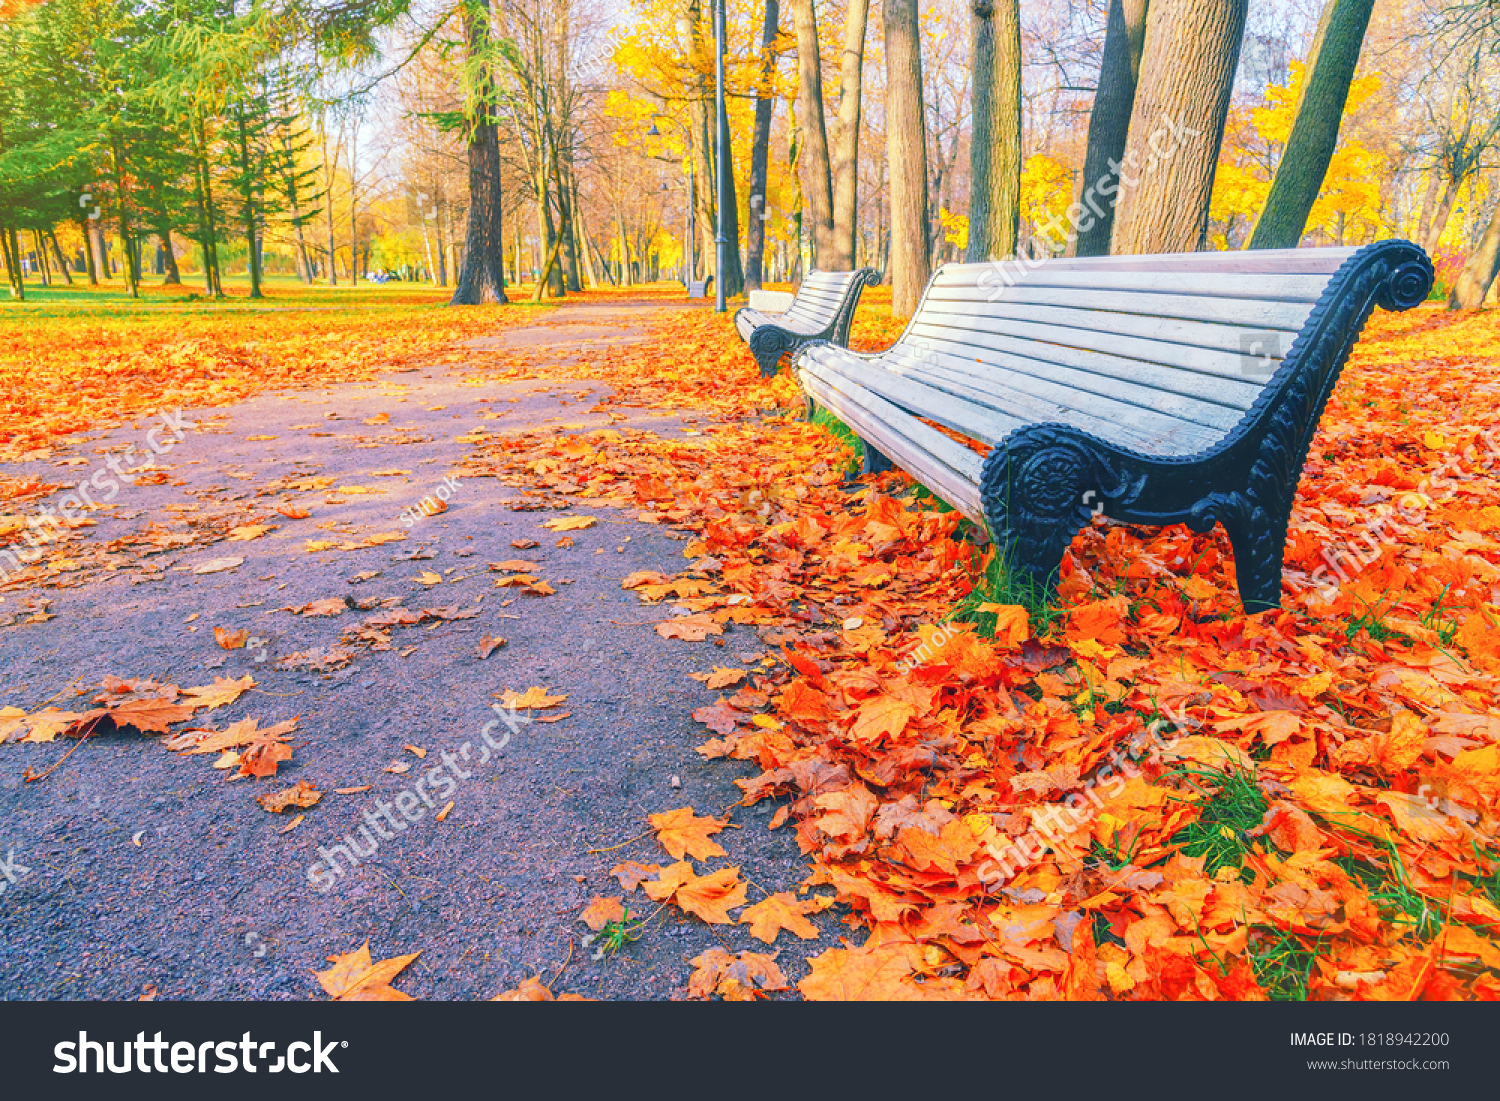 Morning landscape in autumn park. Orange red maple leaves on road. Yellow forest tree on background. Fall season nature scene beauty. Bench alley in city garden. Path in woods, scenery in sun street #1818942200